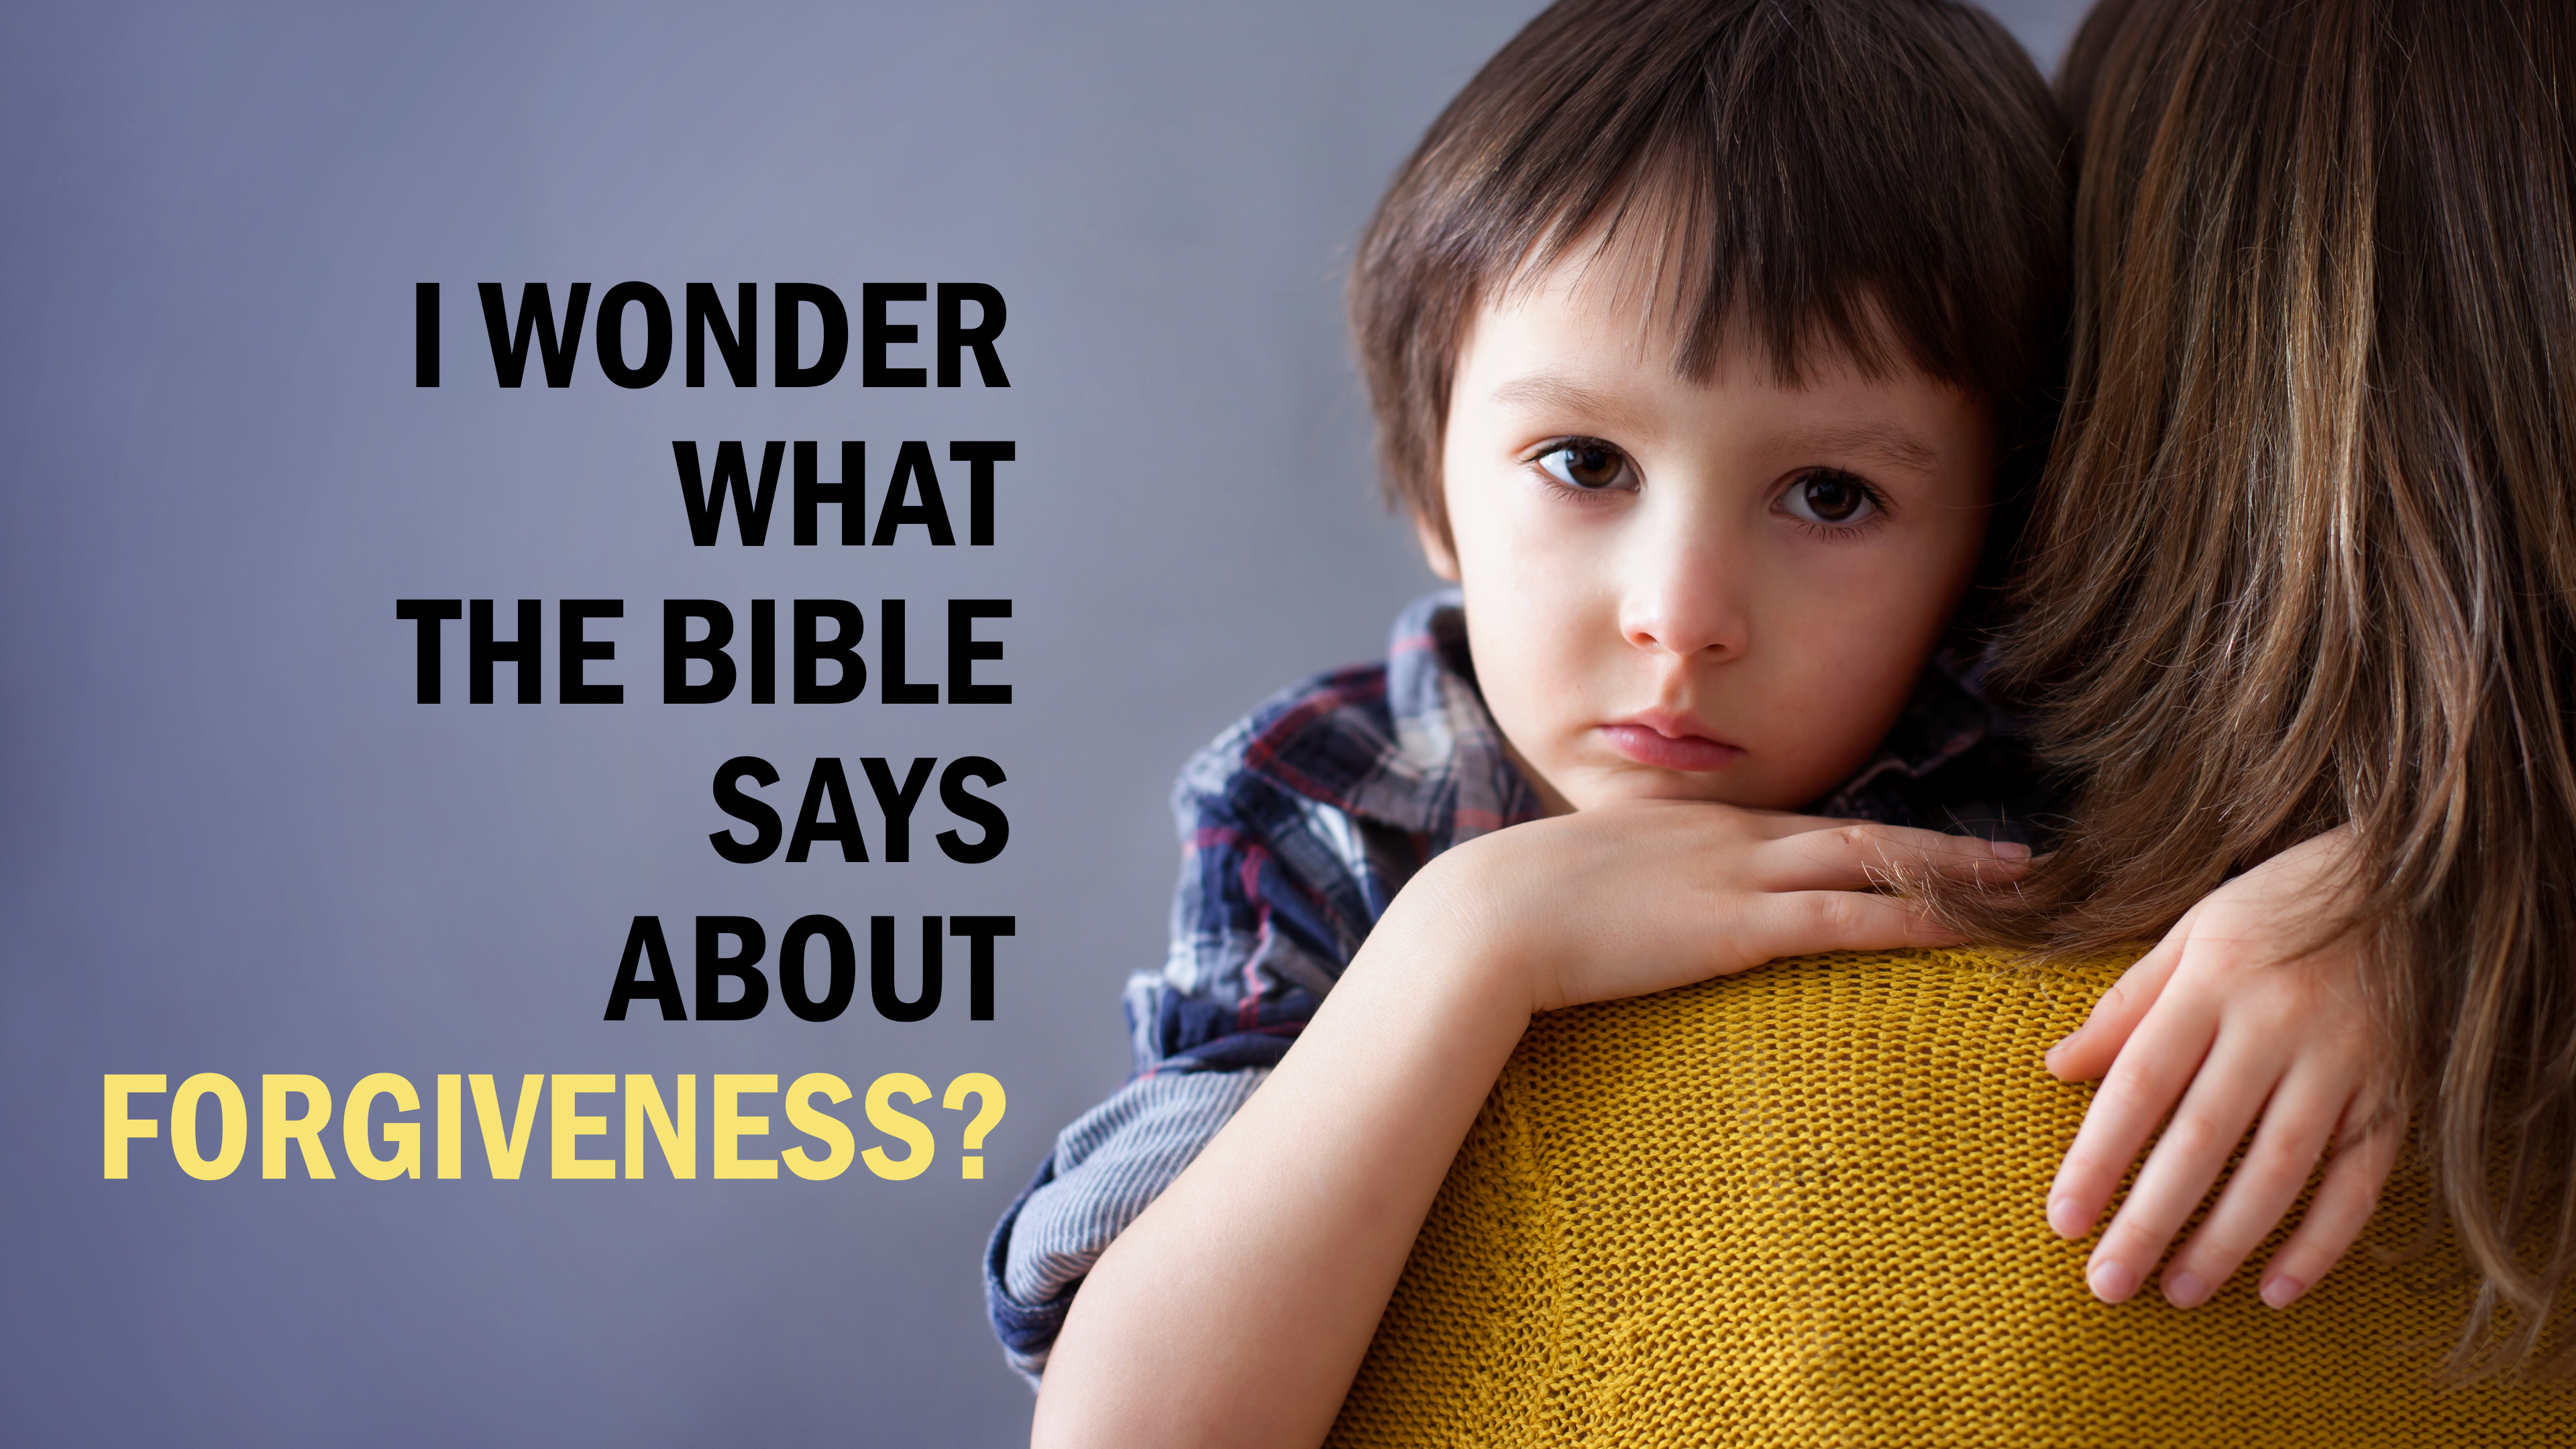 I Wonder What the Bible Says About Forgiveness?